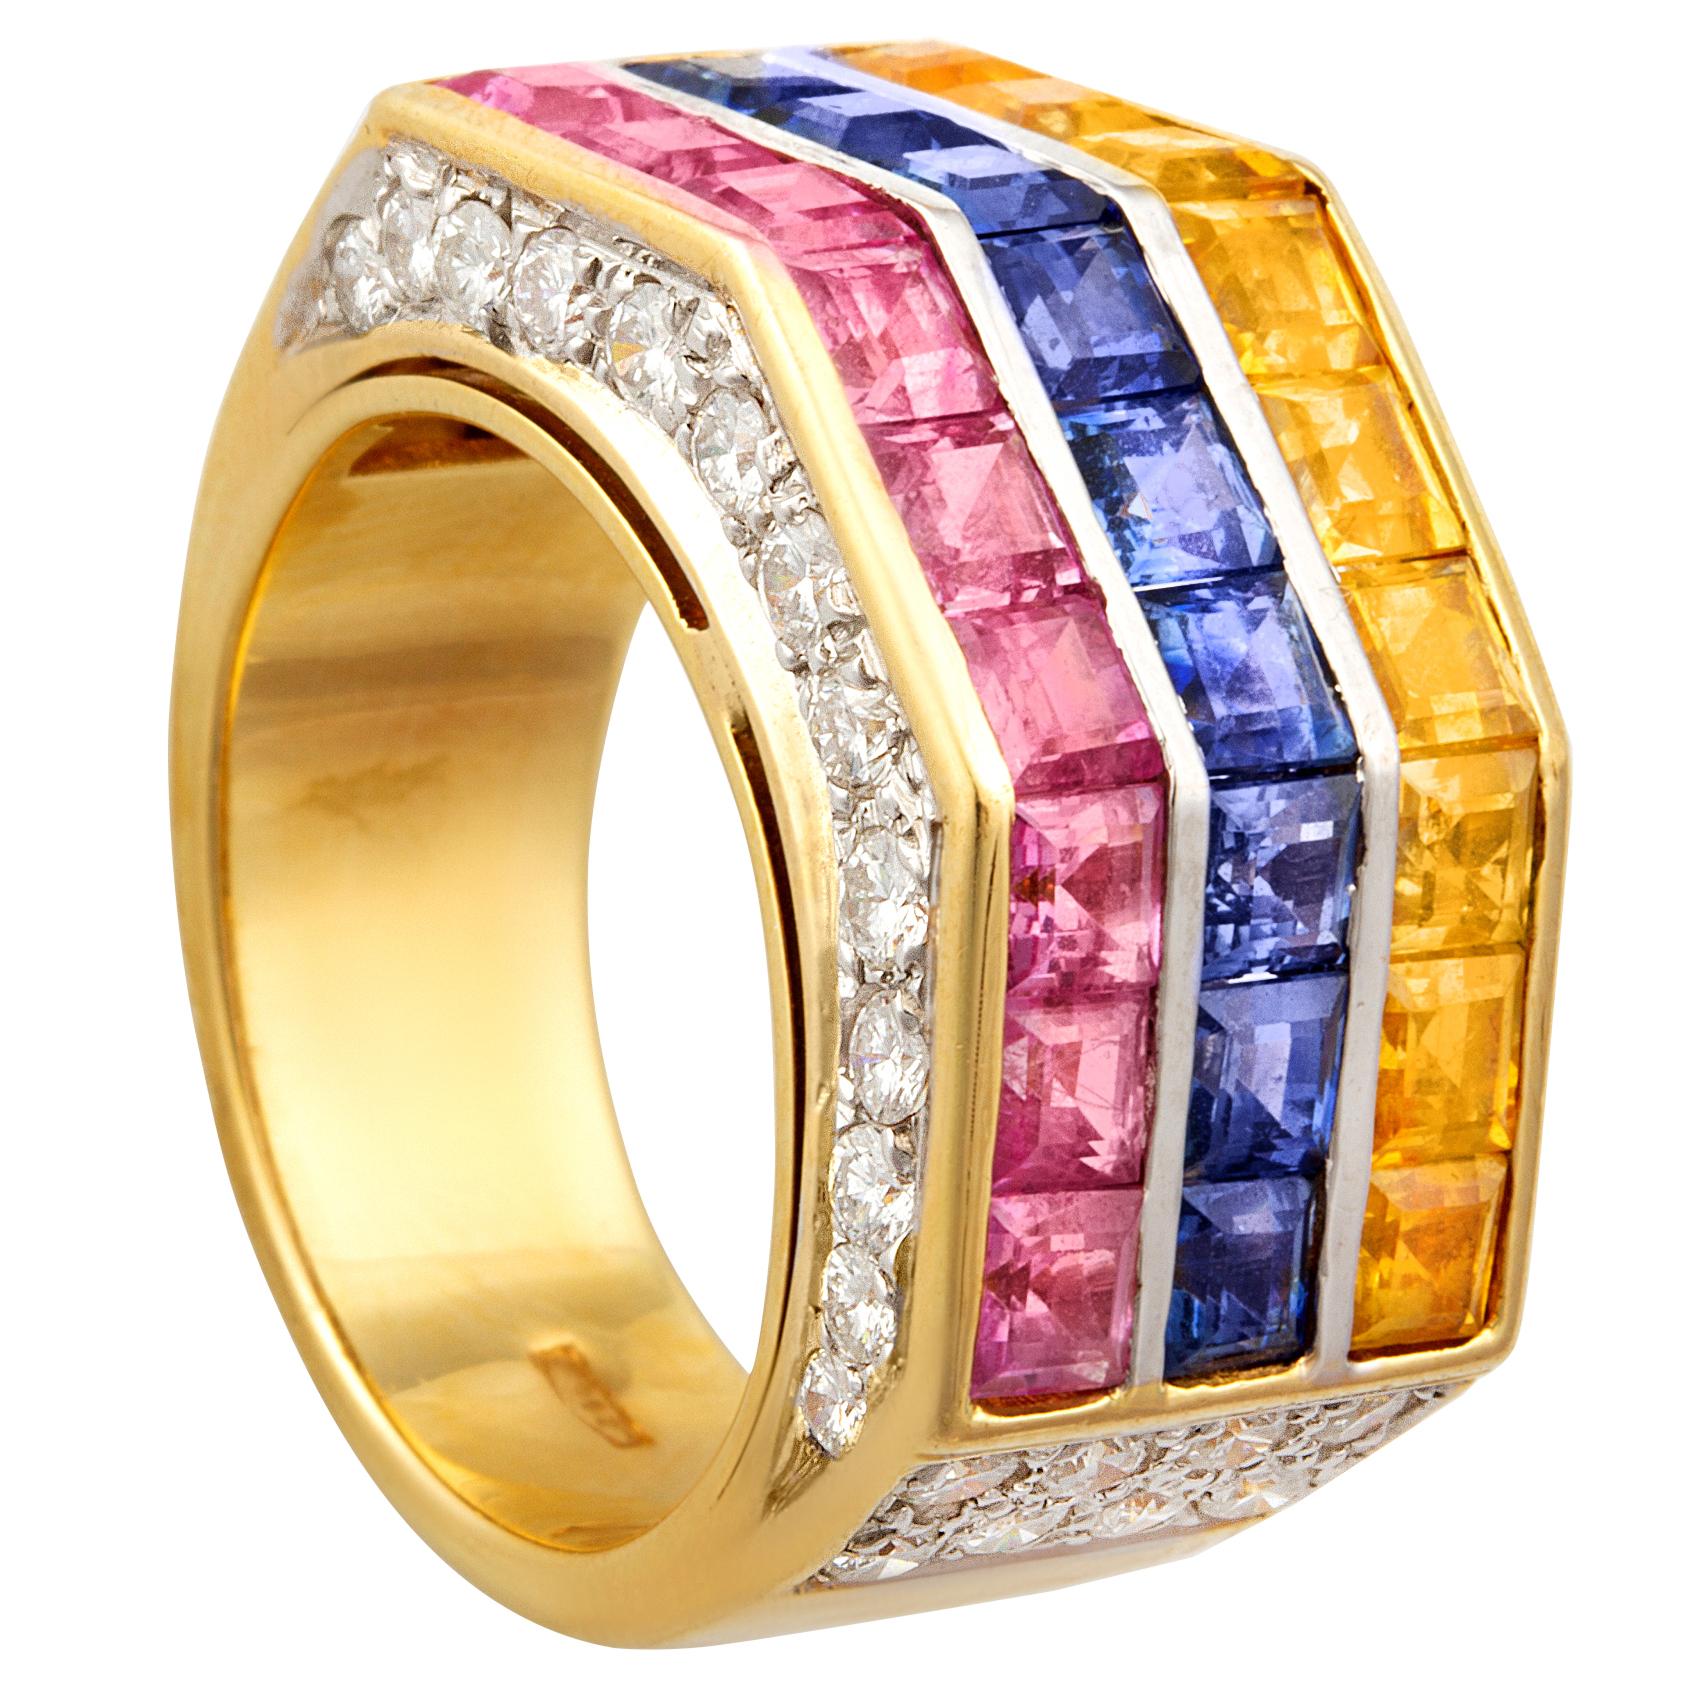 Ella Gafter Multicolor Sapphire Diamond Cocktail Ring For Sale